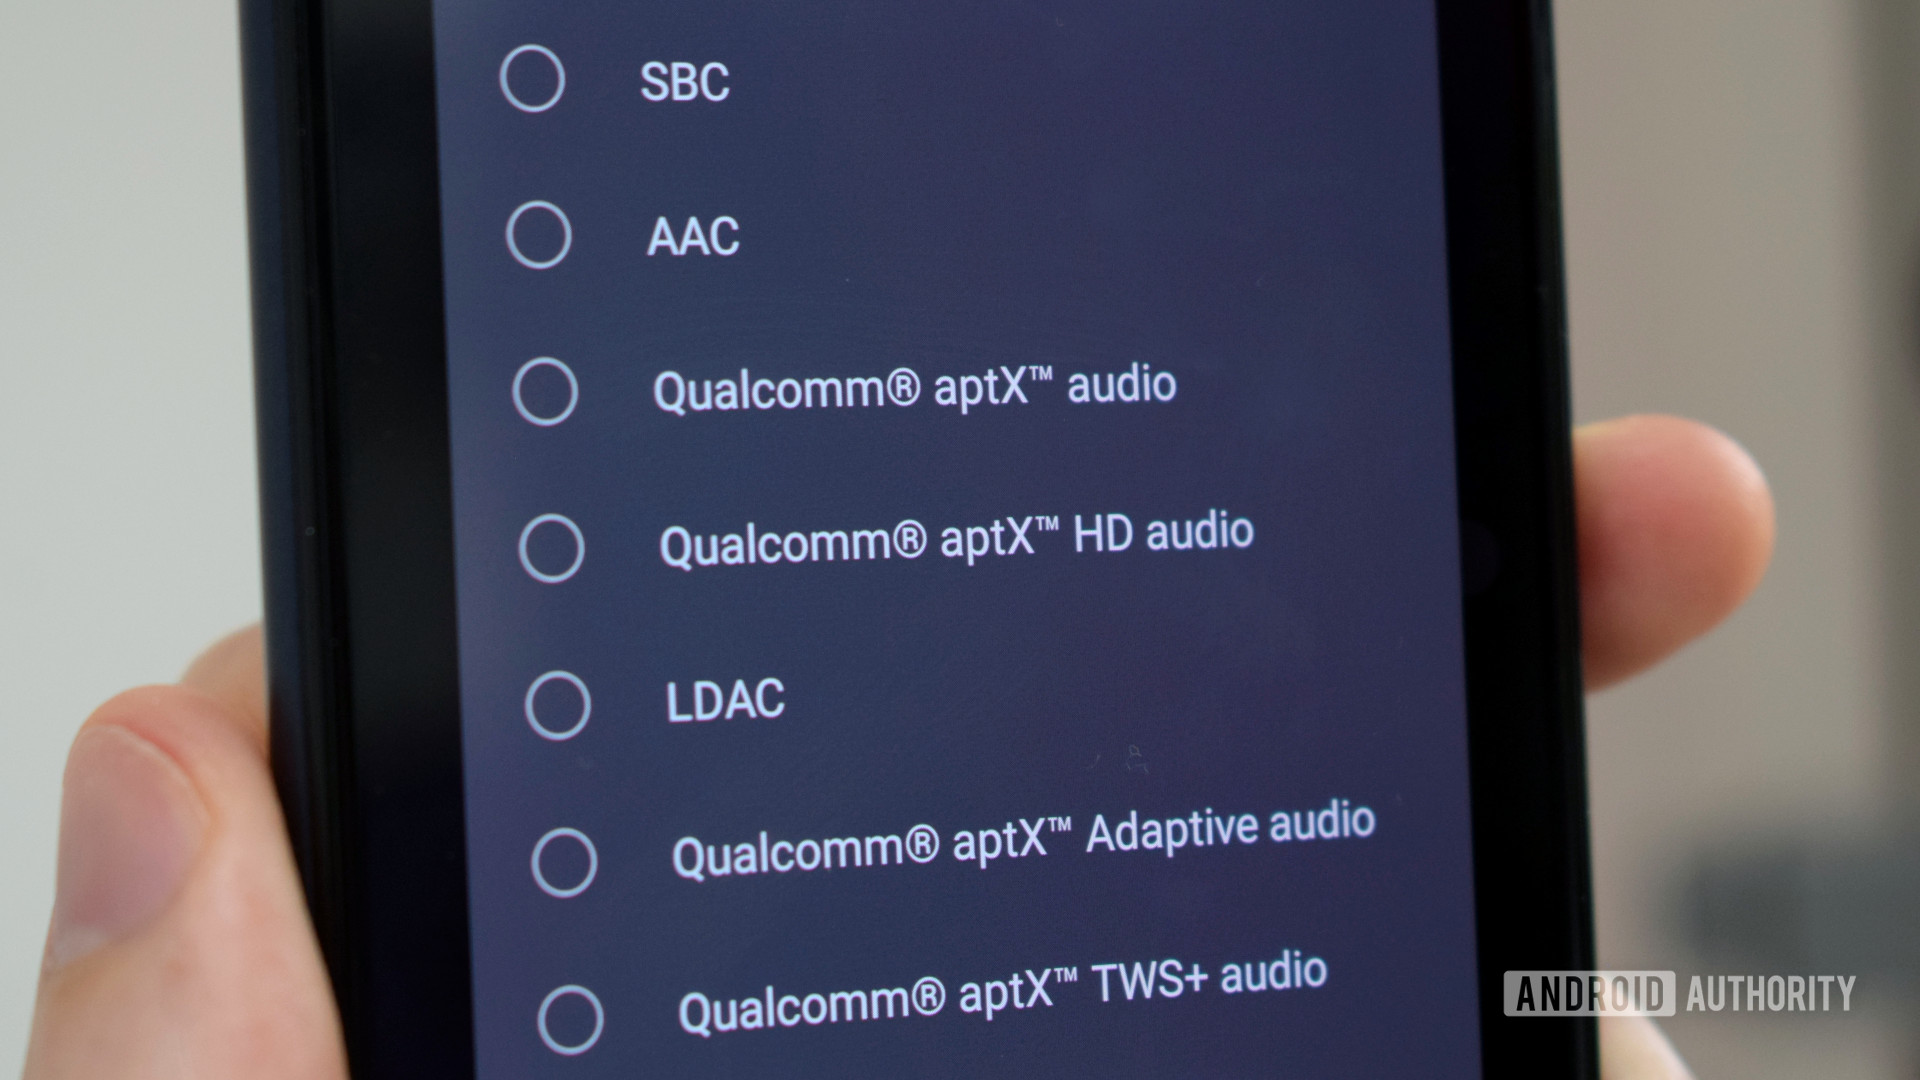 List of Bluetooth audio codecs in the Android settings menu